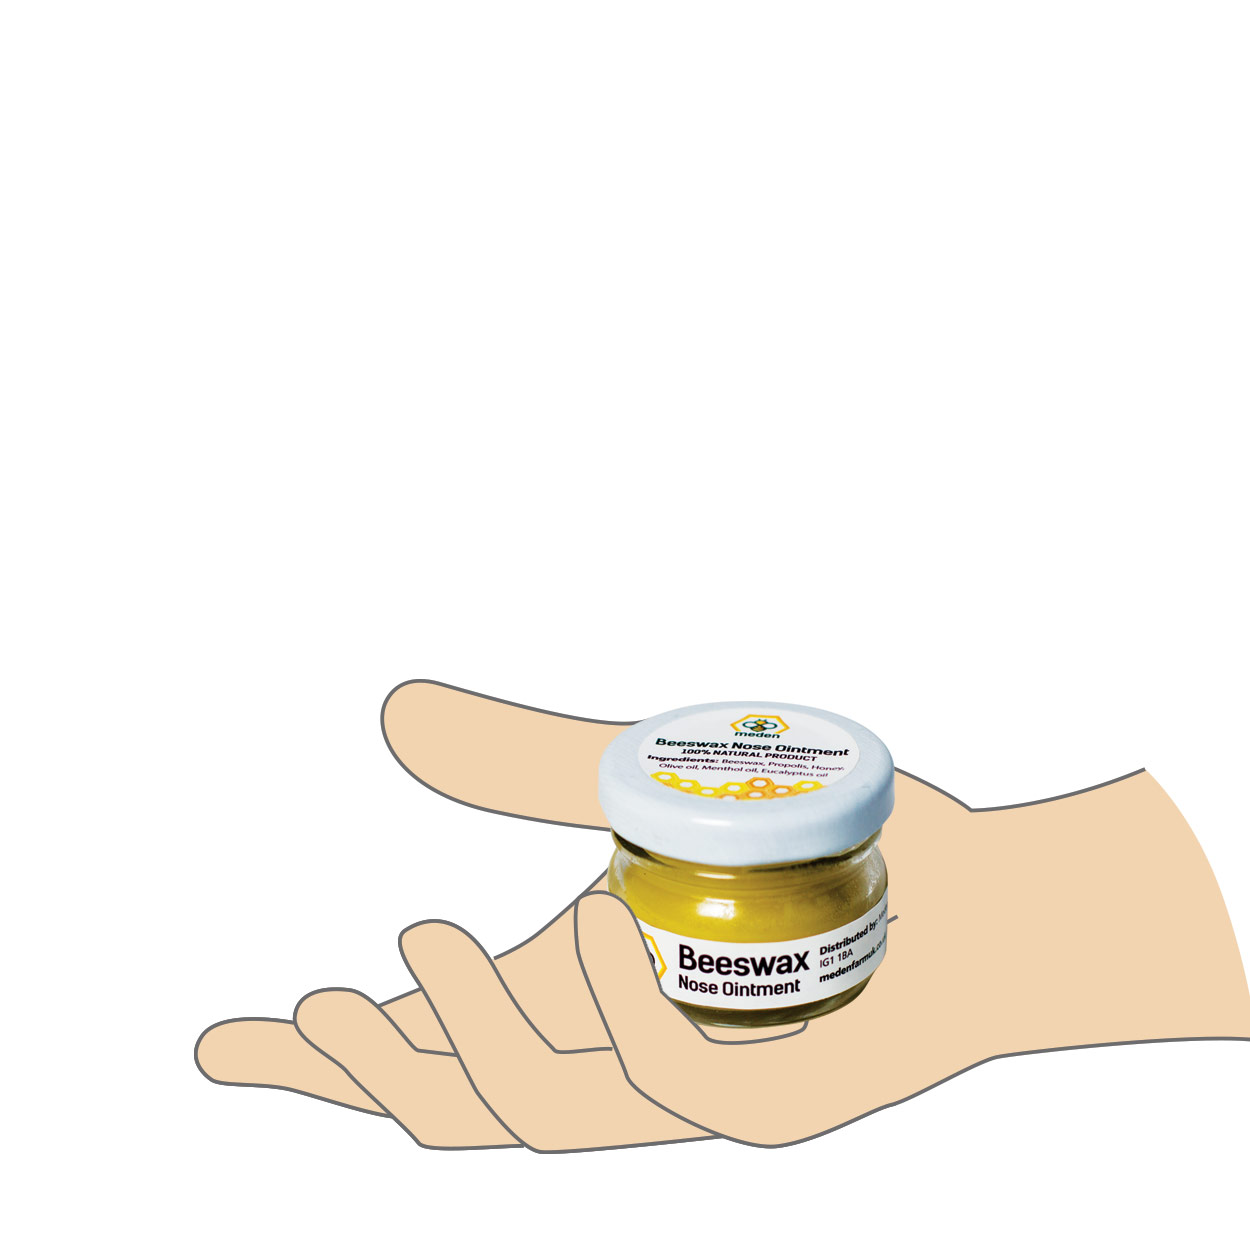 Beeswax Nasal Decongestant Ointment